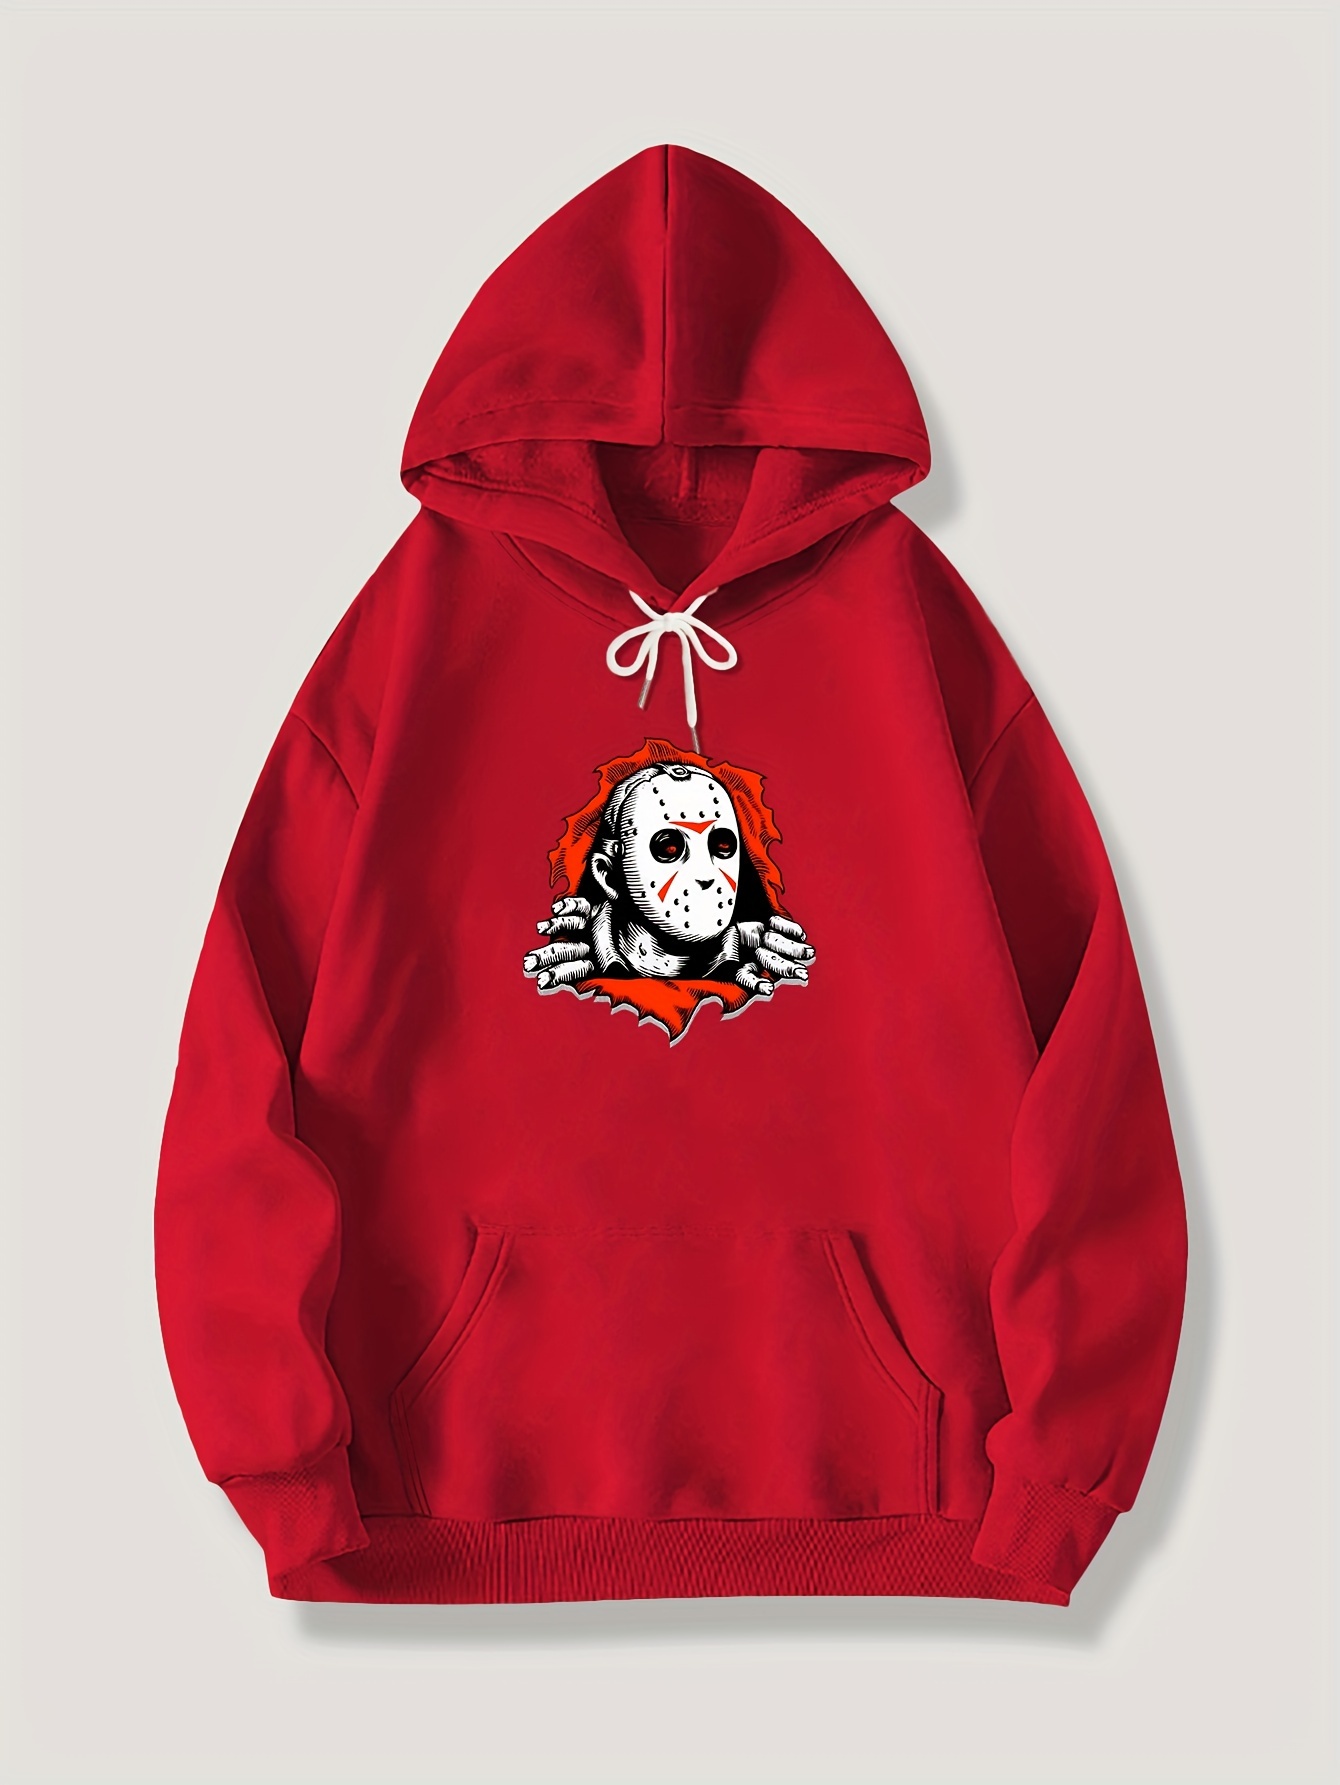 Horror Skull Print Hoodie Cool Hoodies For Men Mens Casual Graphic Design  Pullover Hooded Sweatshirt With Kangaroo Pocket Streetwear For Winter Fall  As Gifts, High-quality & Affordable